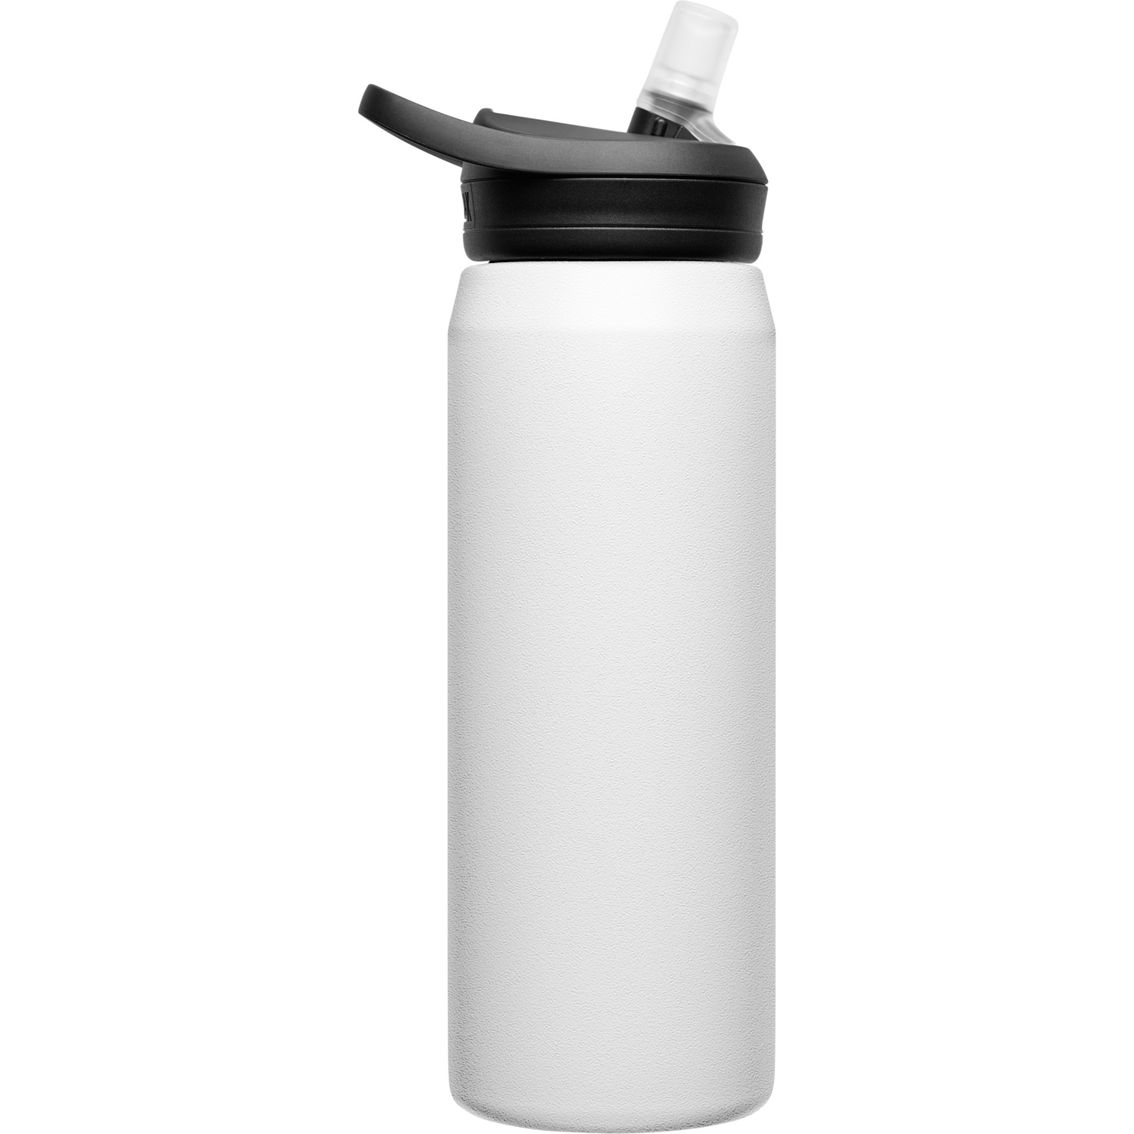 Camelbak Eddy+ Insulated Stainless Steel Water Bottle 25 oz. - Image 2 of 2